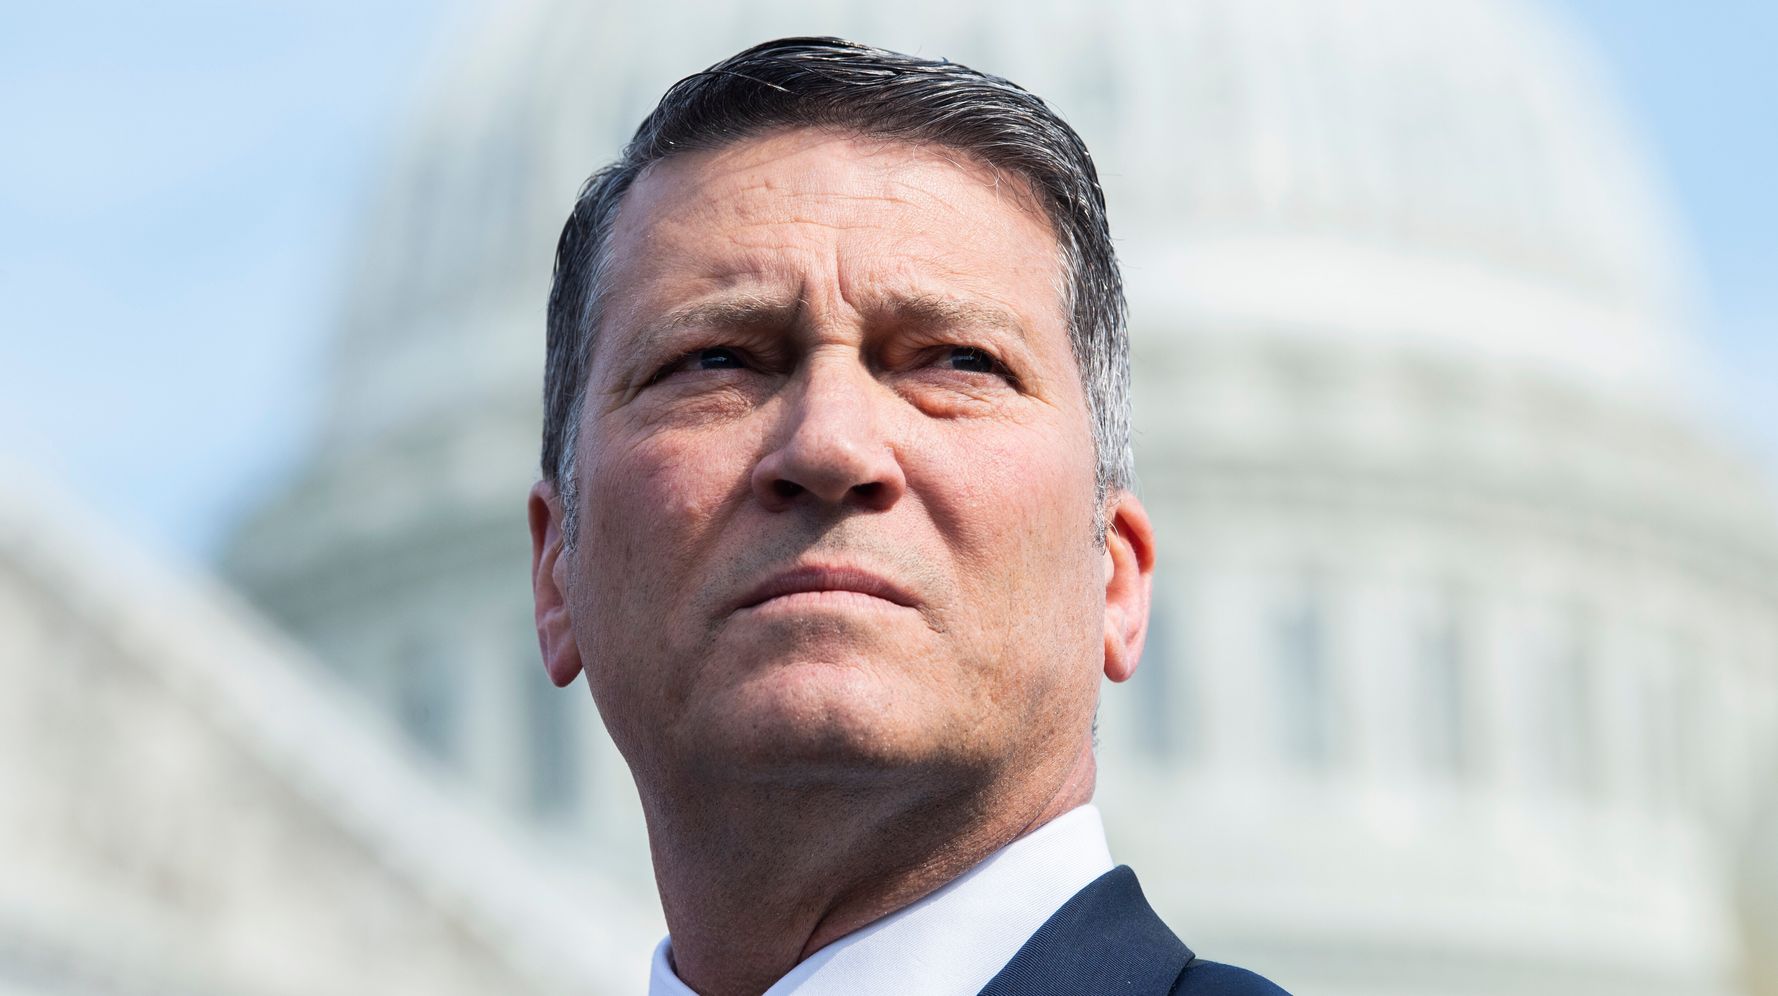 GOP Lawmaker Tries To Shame Democrats On Vaccinations. Except They’re All Vaccinated.